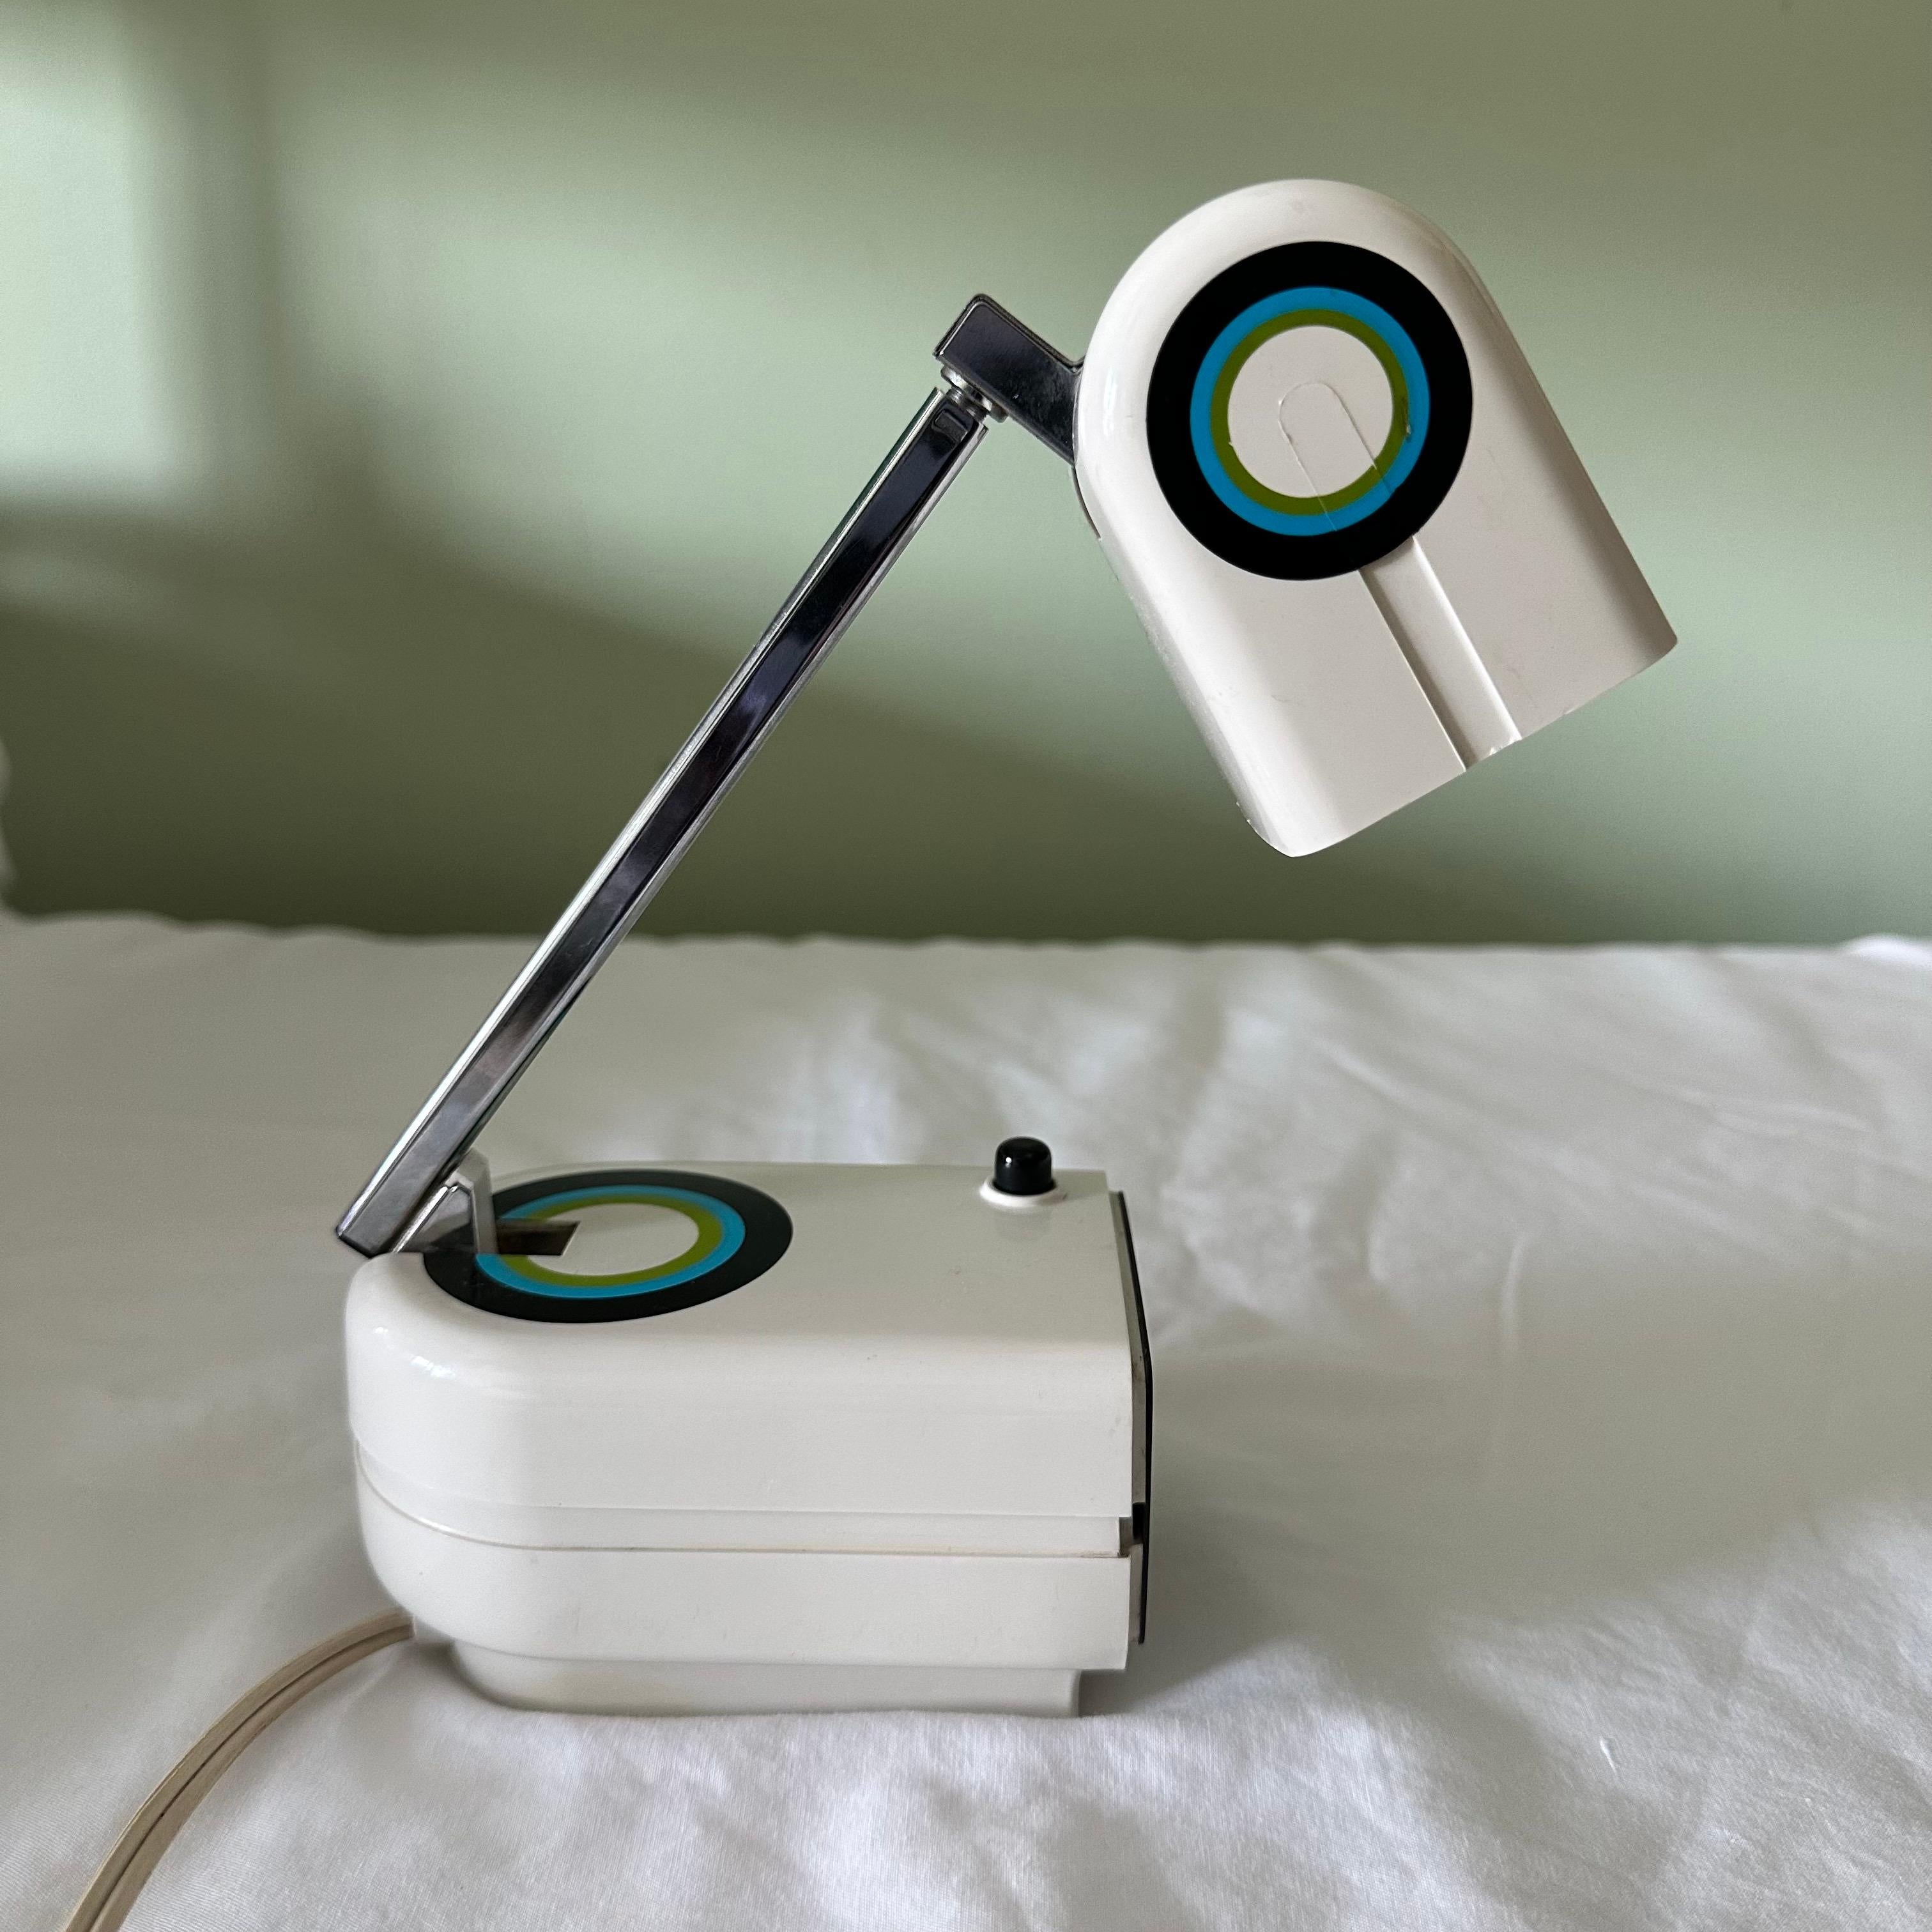 Rare Signed Pierre Cardin Space Age Telescopic Table Lamp in White, Blue, Green & Black. Can also be mounted on the wall as a wall lamp or sconce. Off-white in color, accented with a blue, green and black target bullseye design. Collapses into a